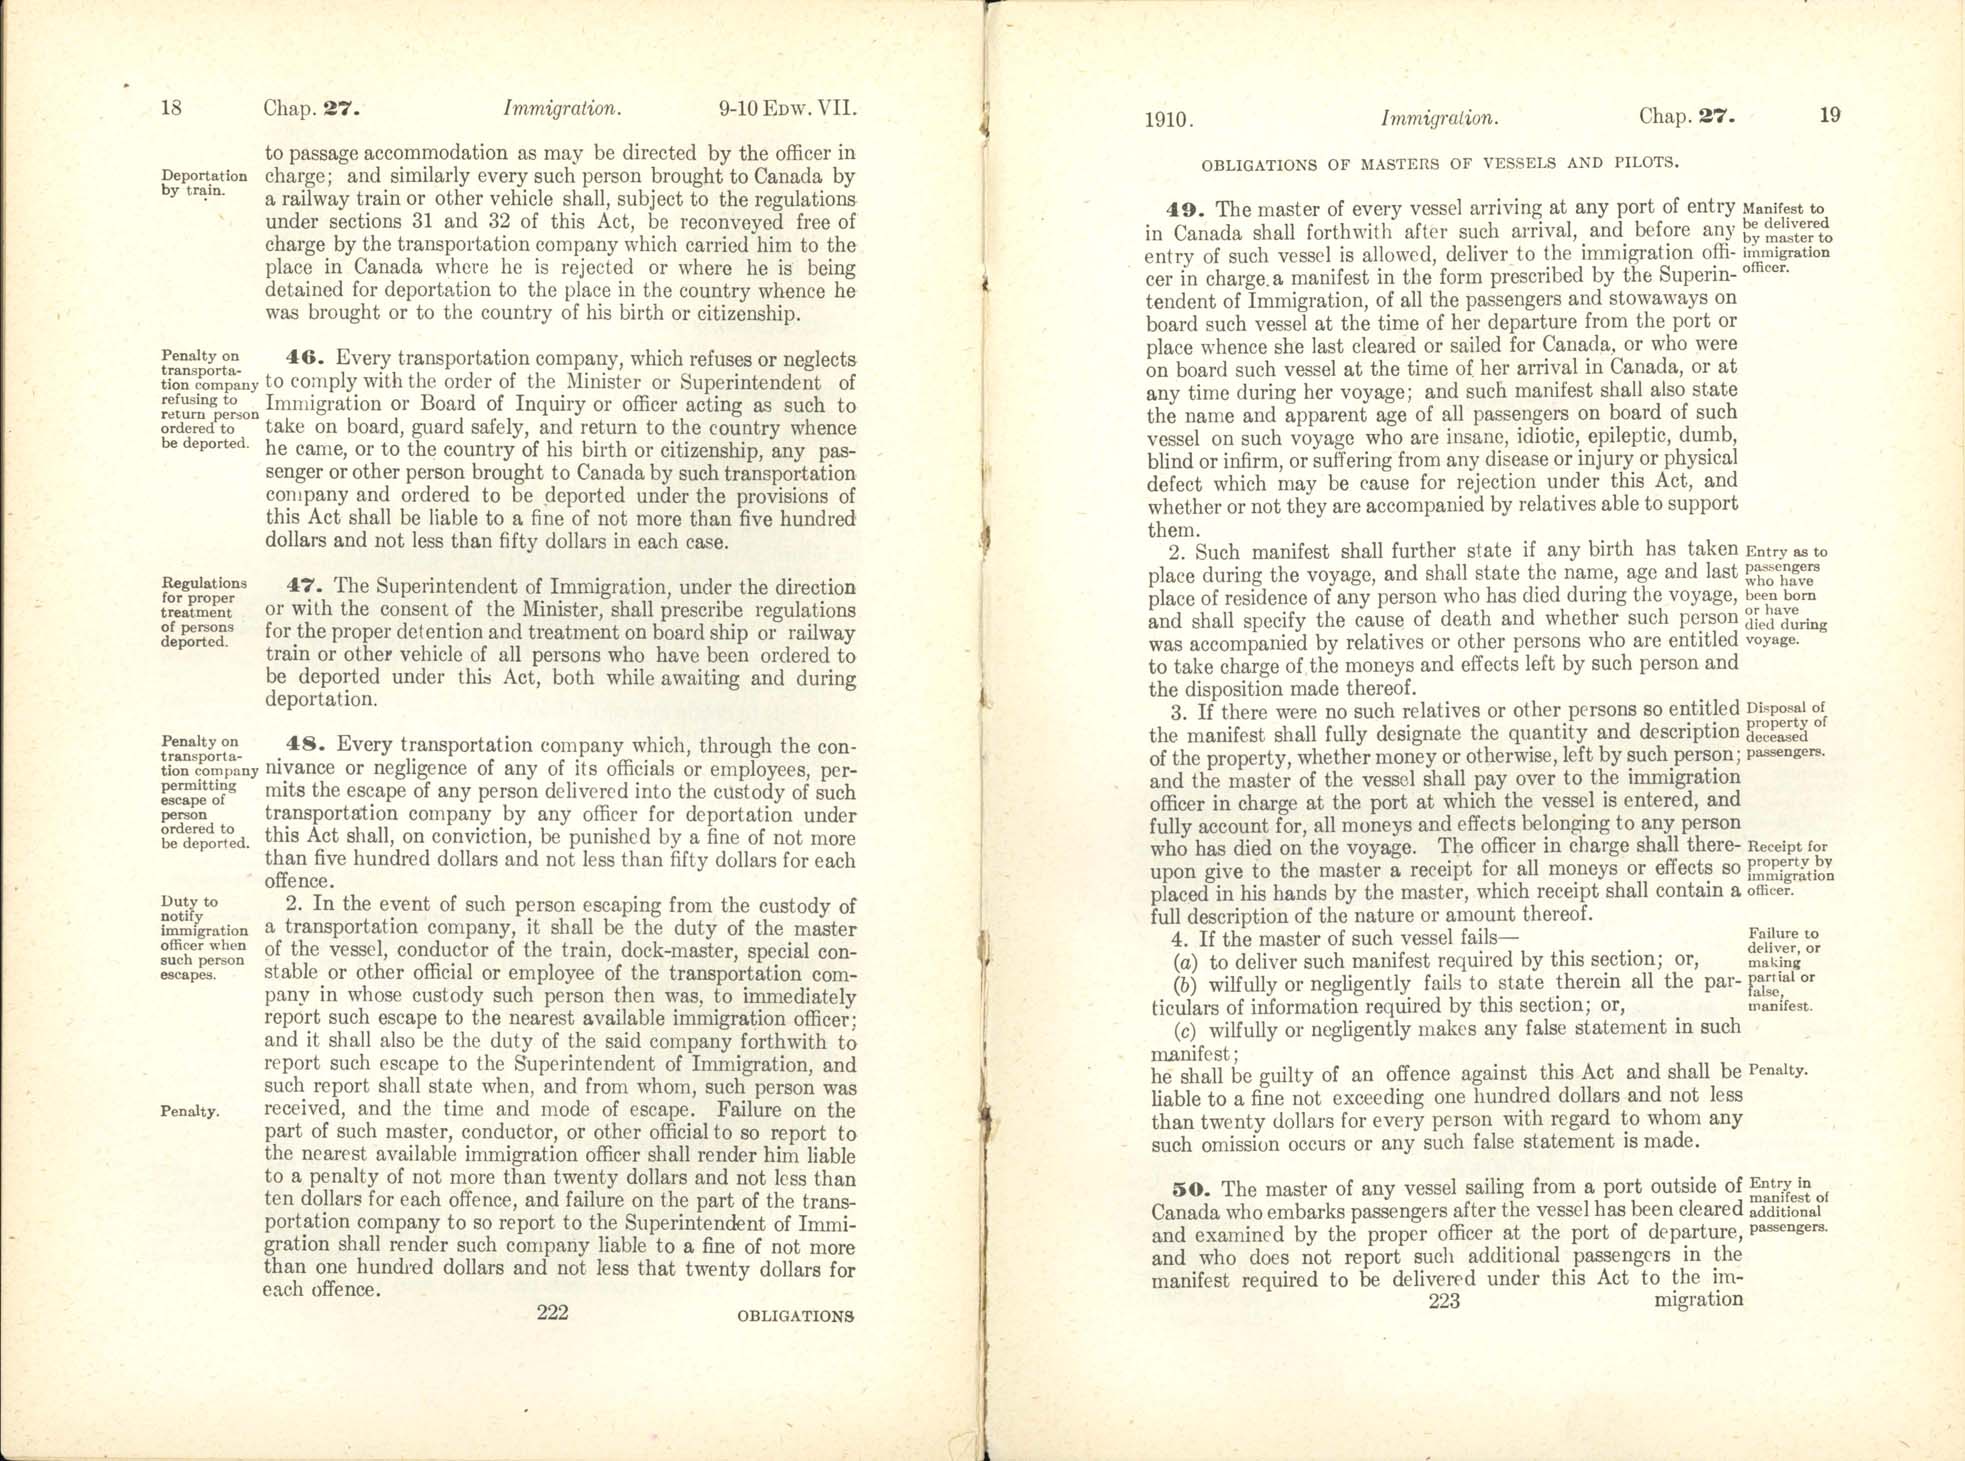 Chap. 27 Page 222, 223 Immigration Act, 1910